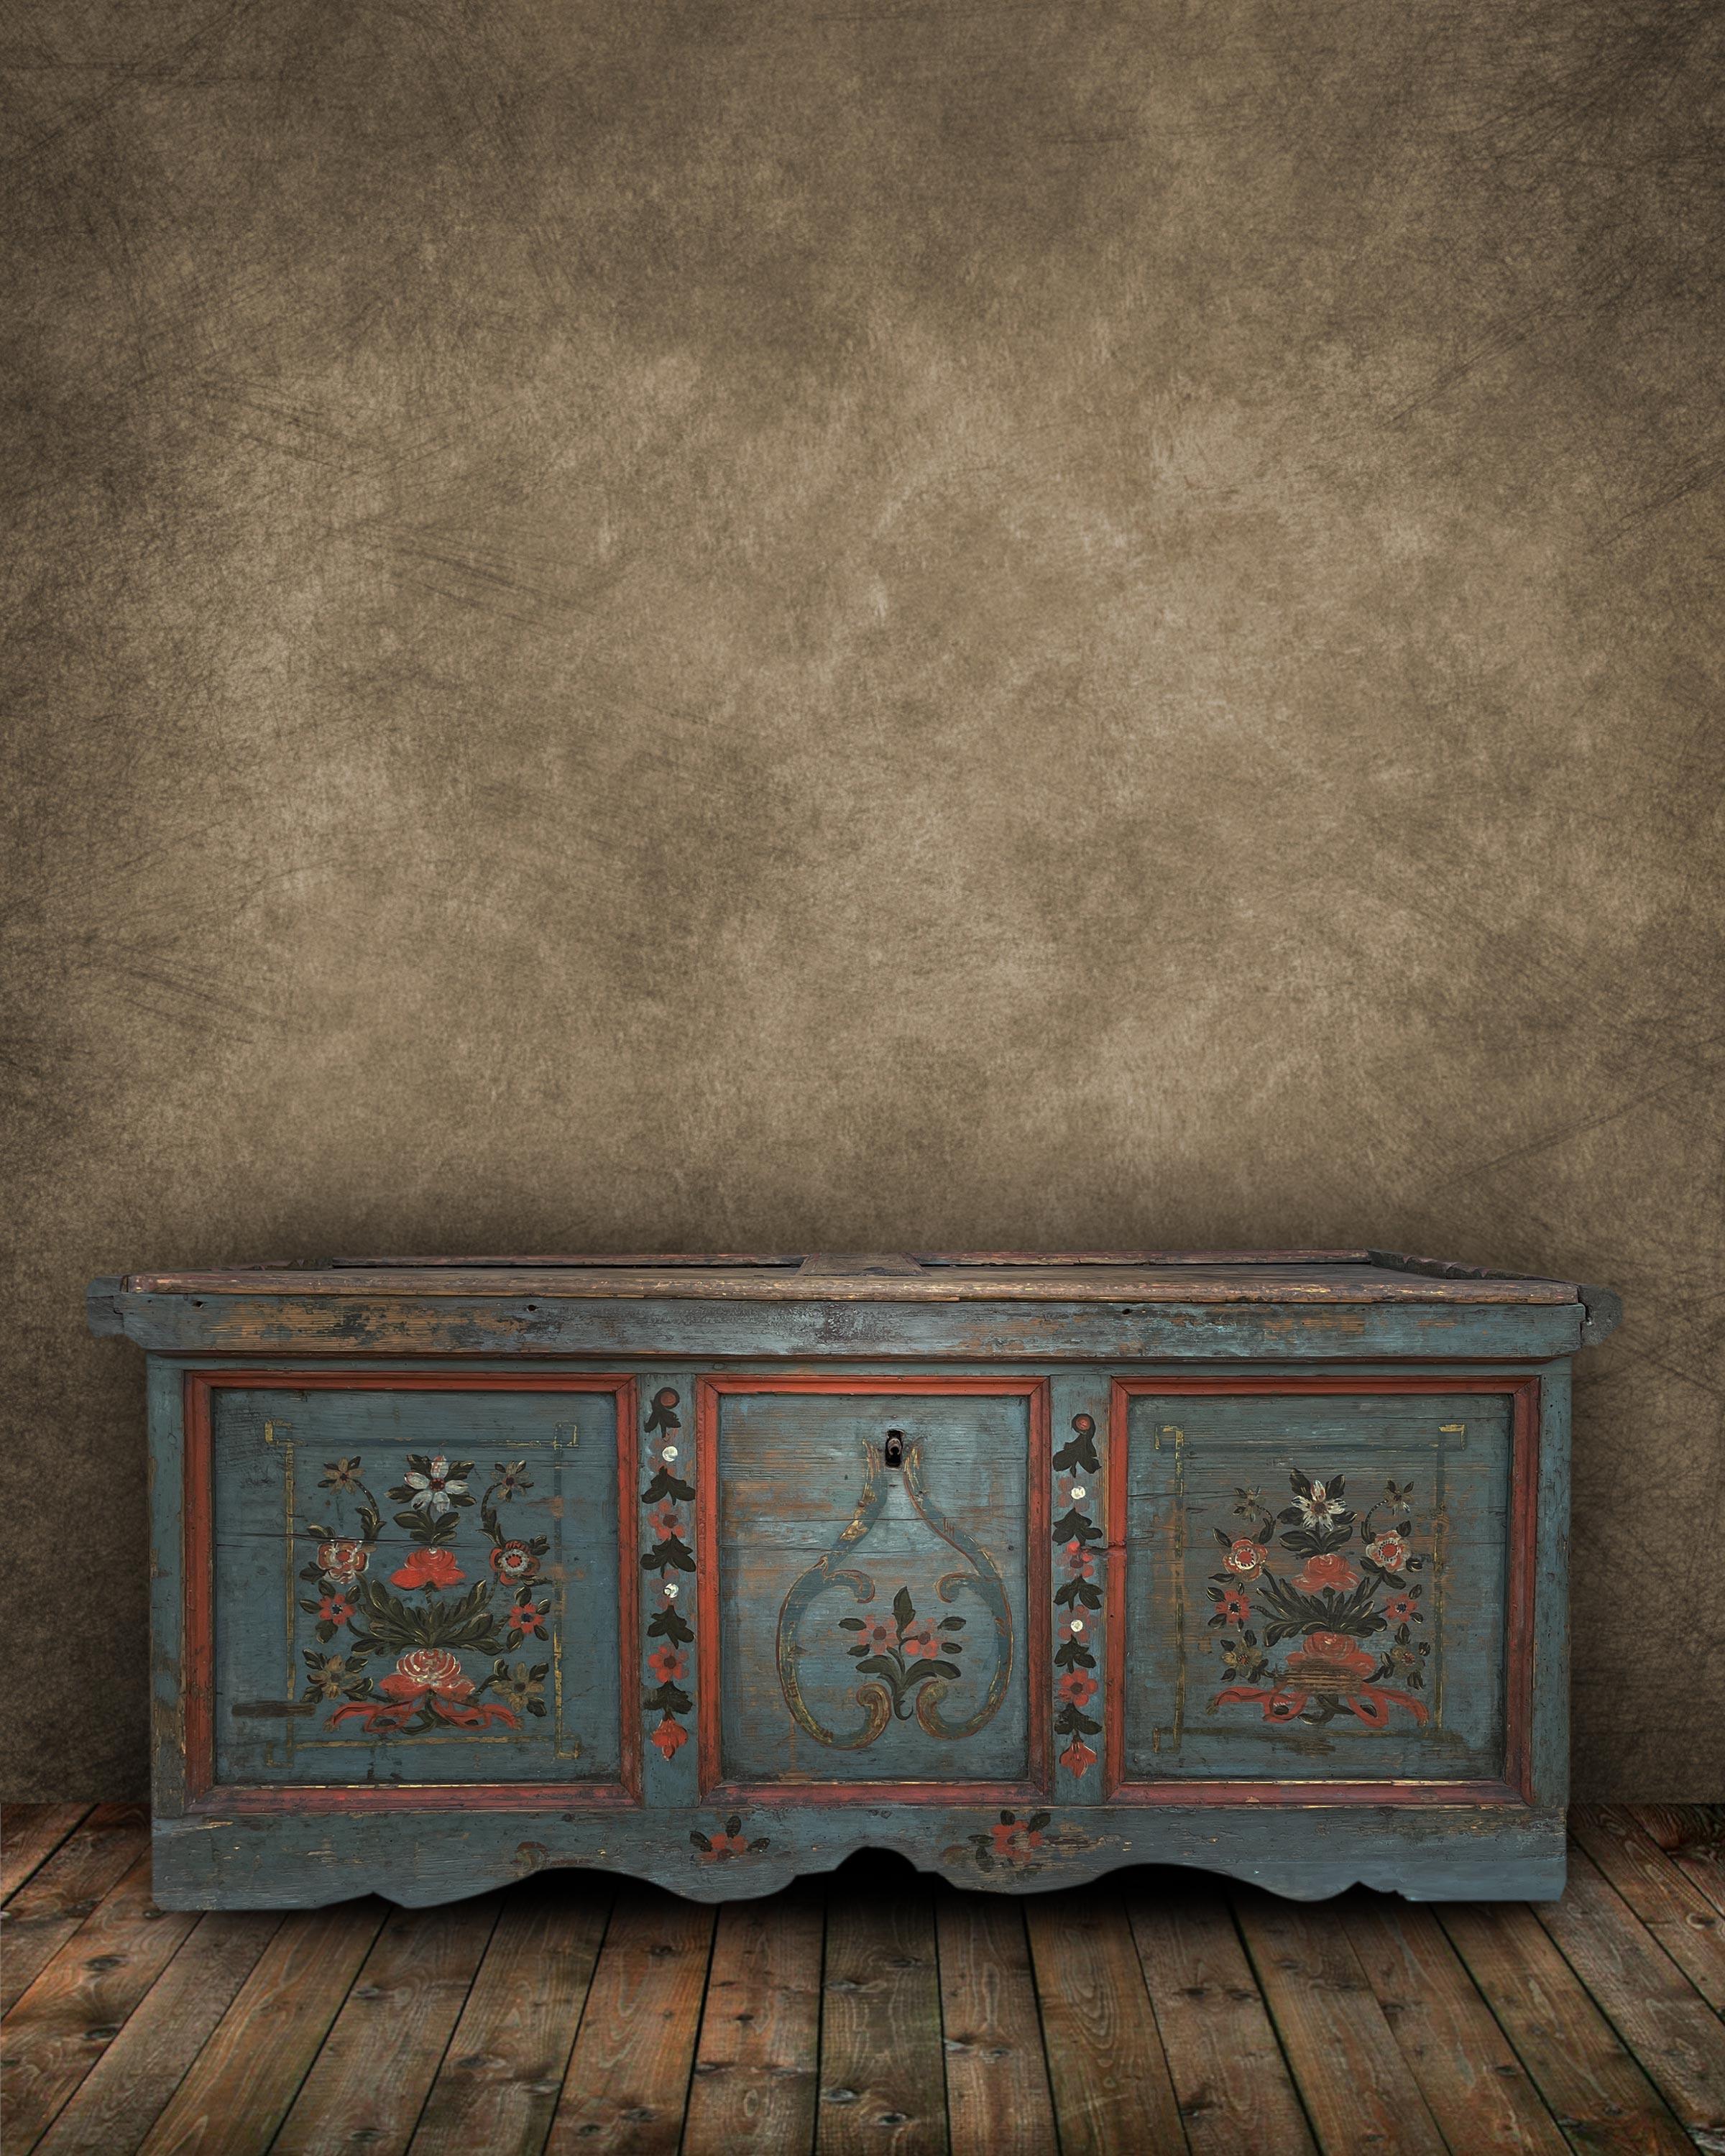 Neoclassical Revival Early 19th Century Blue Floral Panted Blanket Chest For Sale